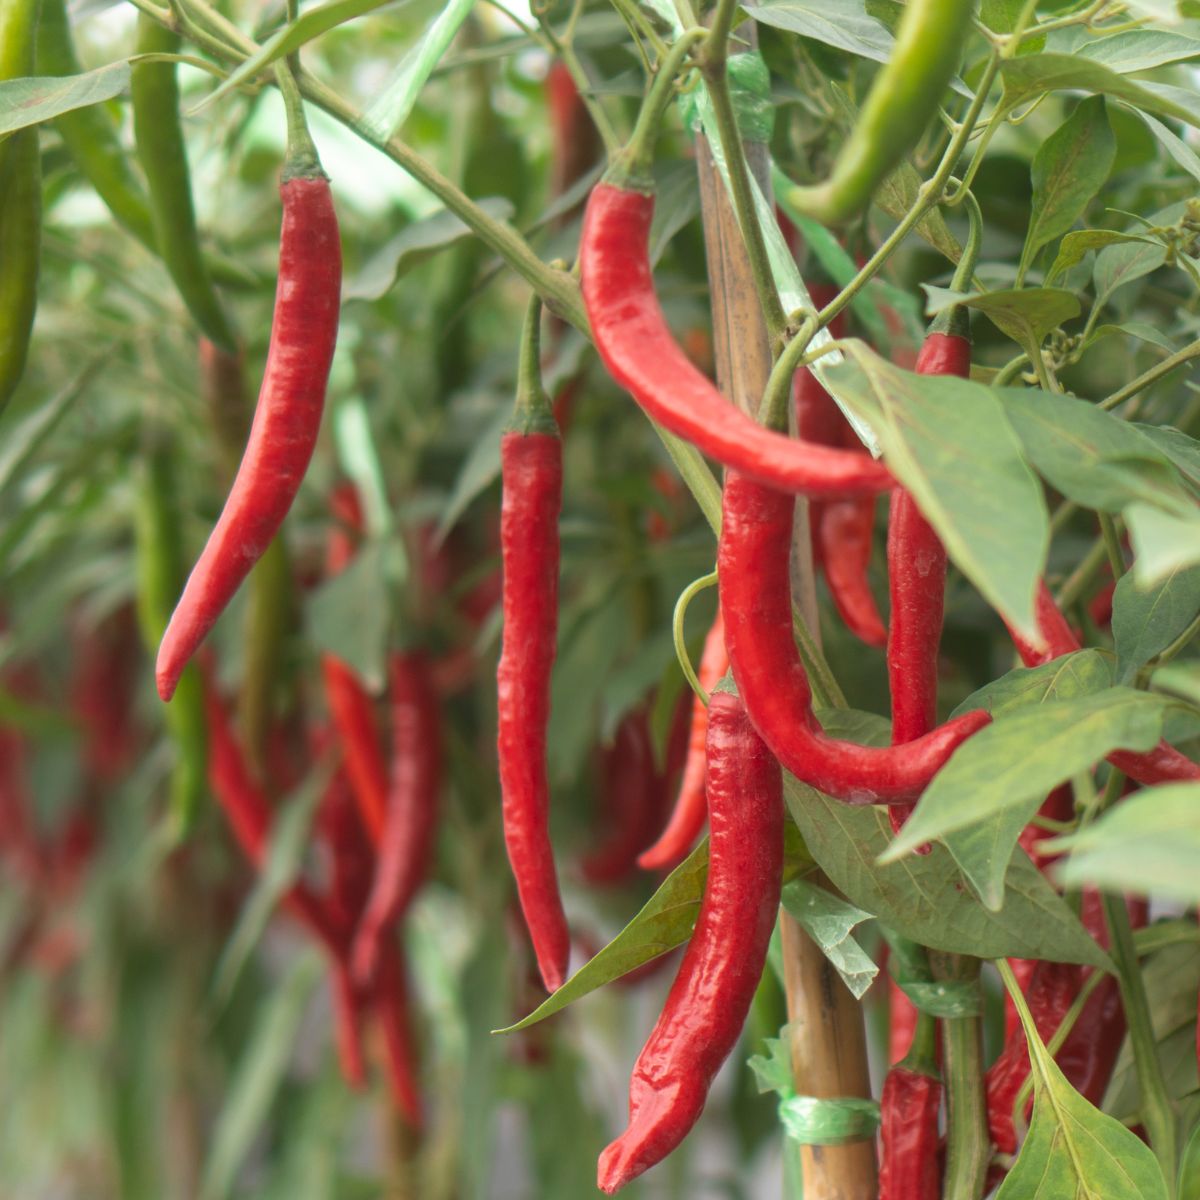 Red chili peppers ready to harvest.